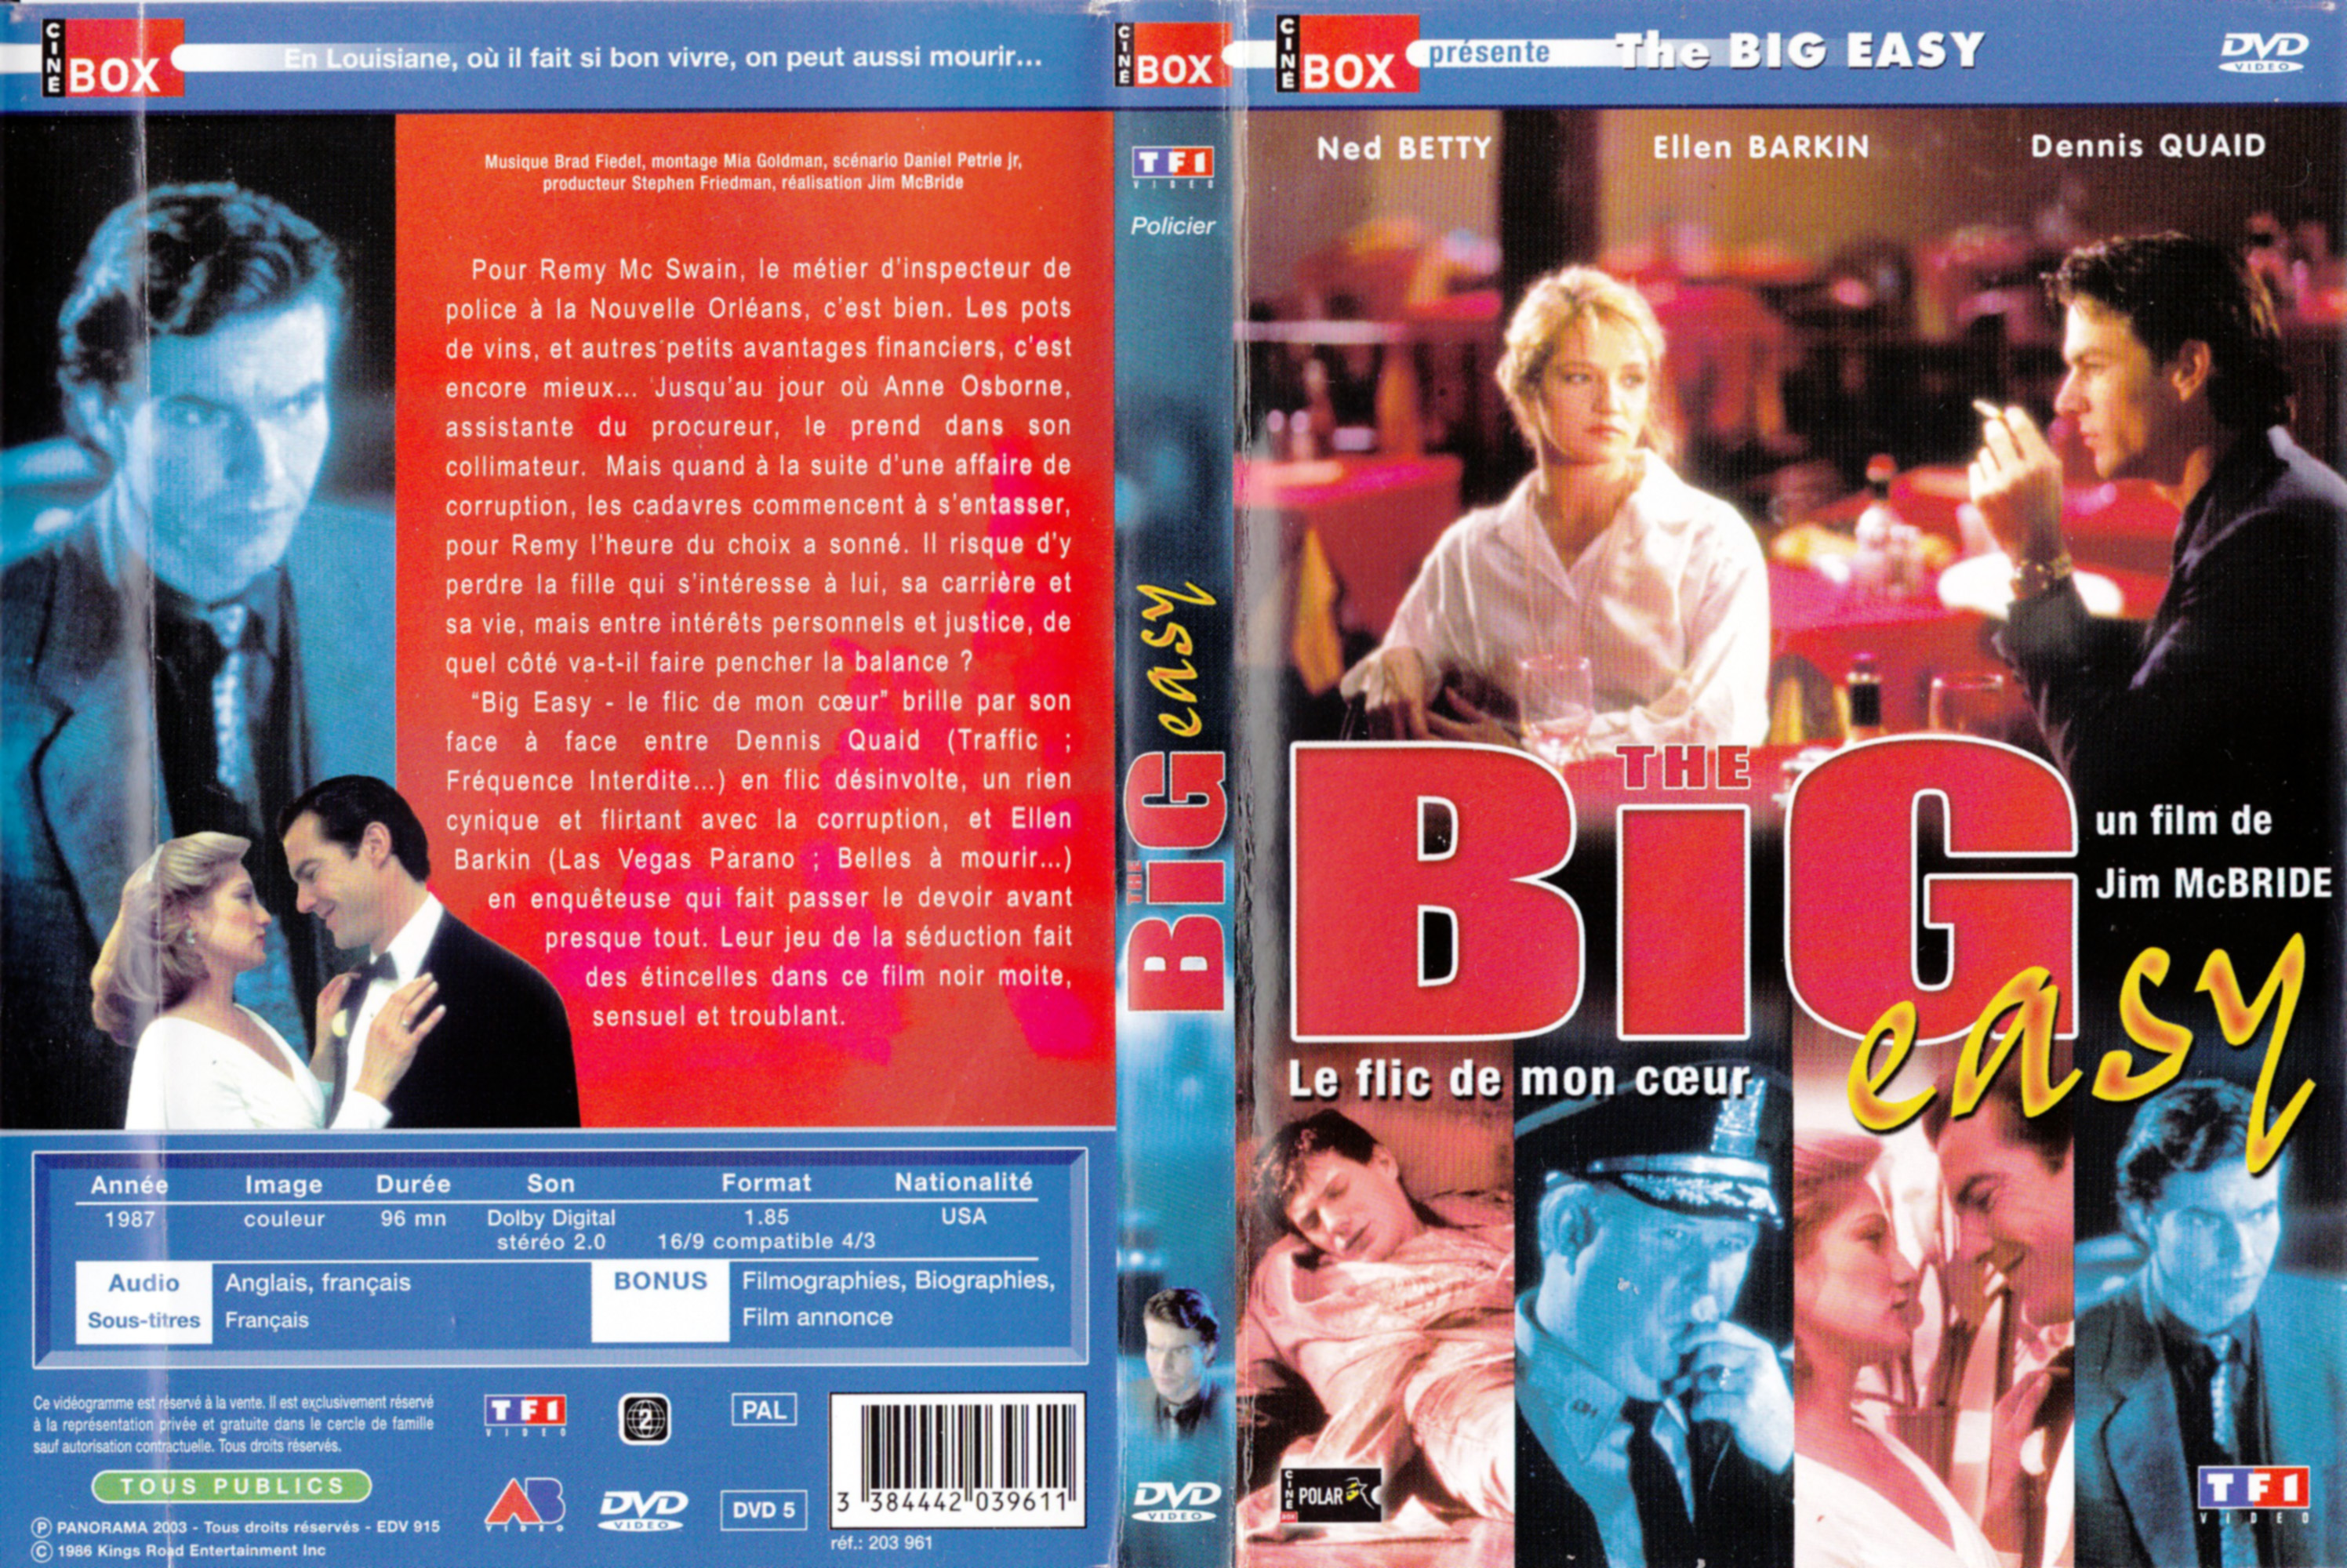 Jaquette DVD The big easy